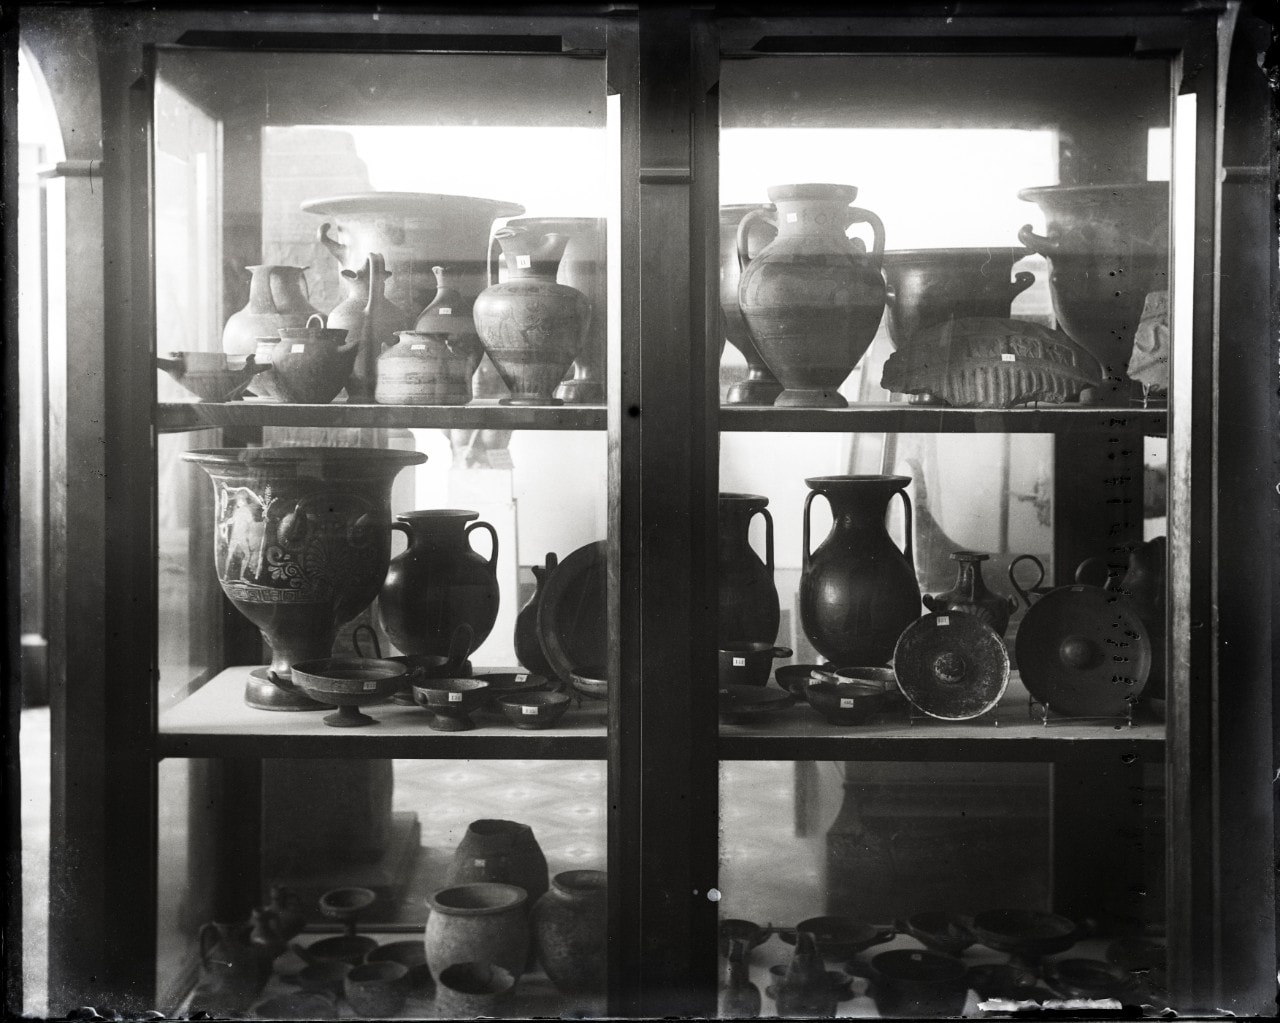 A cabinet filled with pottery.